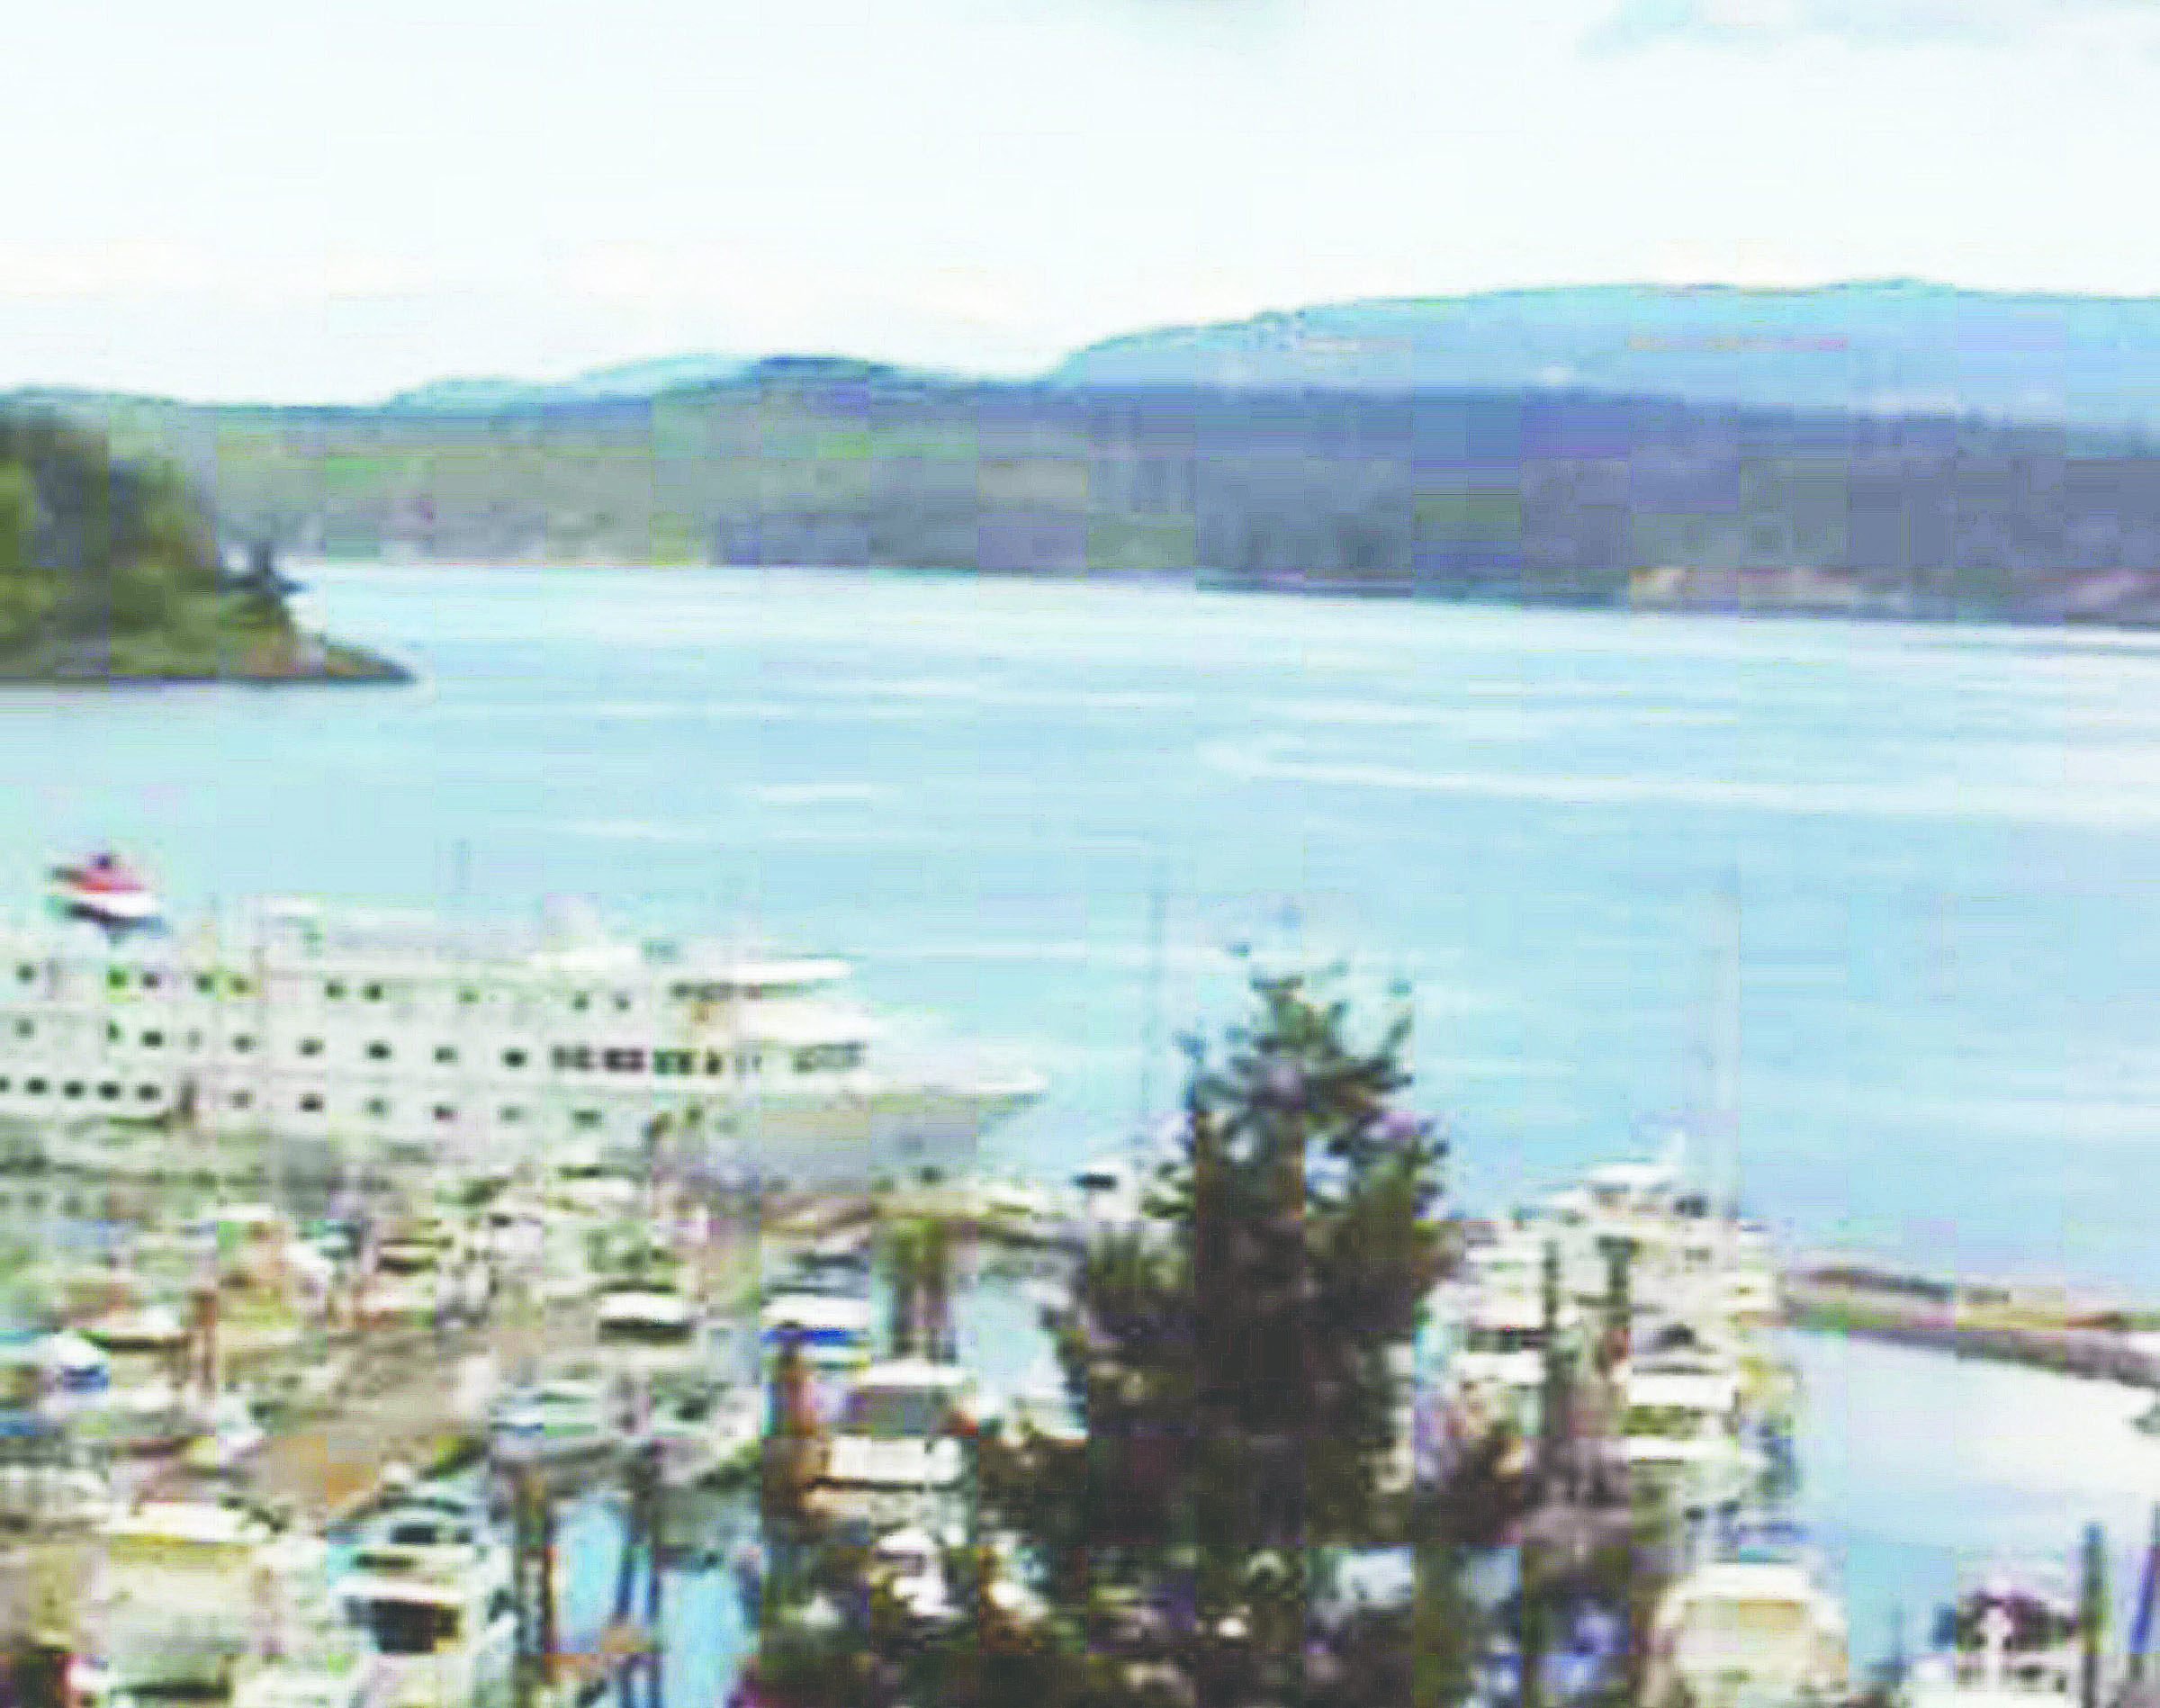 Webcam view of Friday Harbor at midday today shows the American Spirit tied up at upper left.